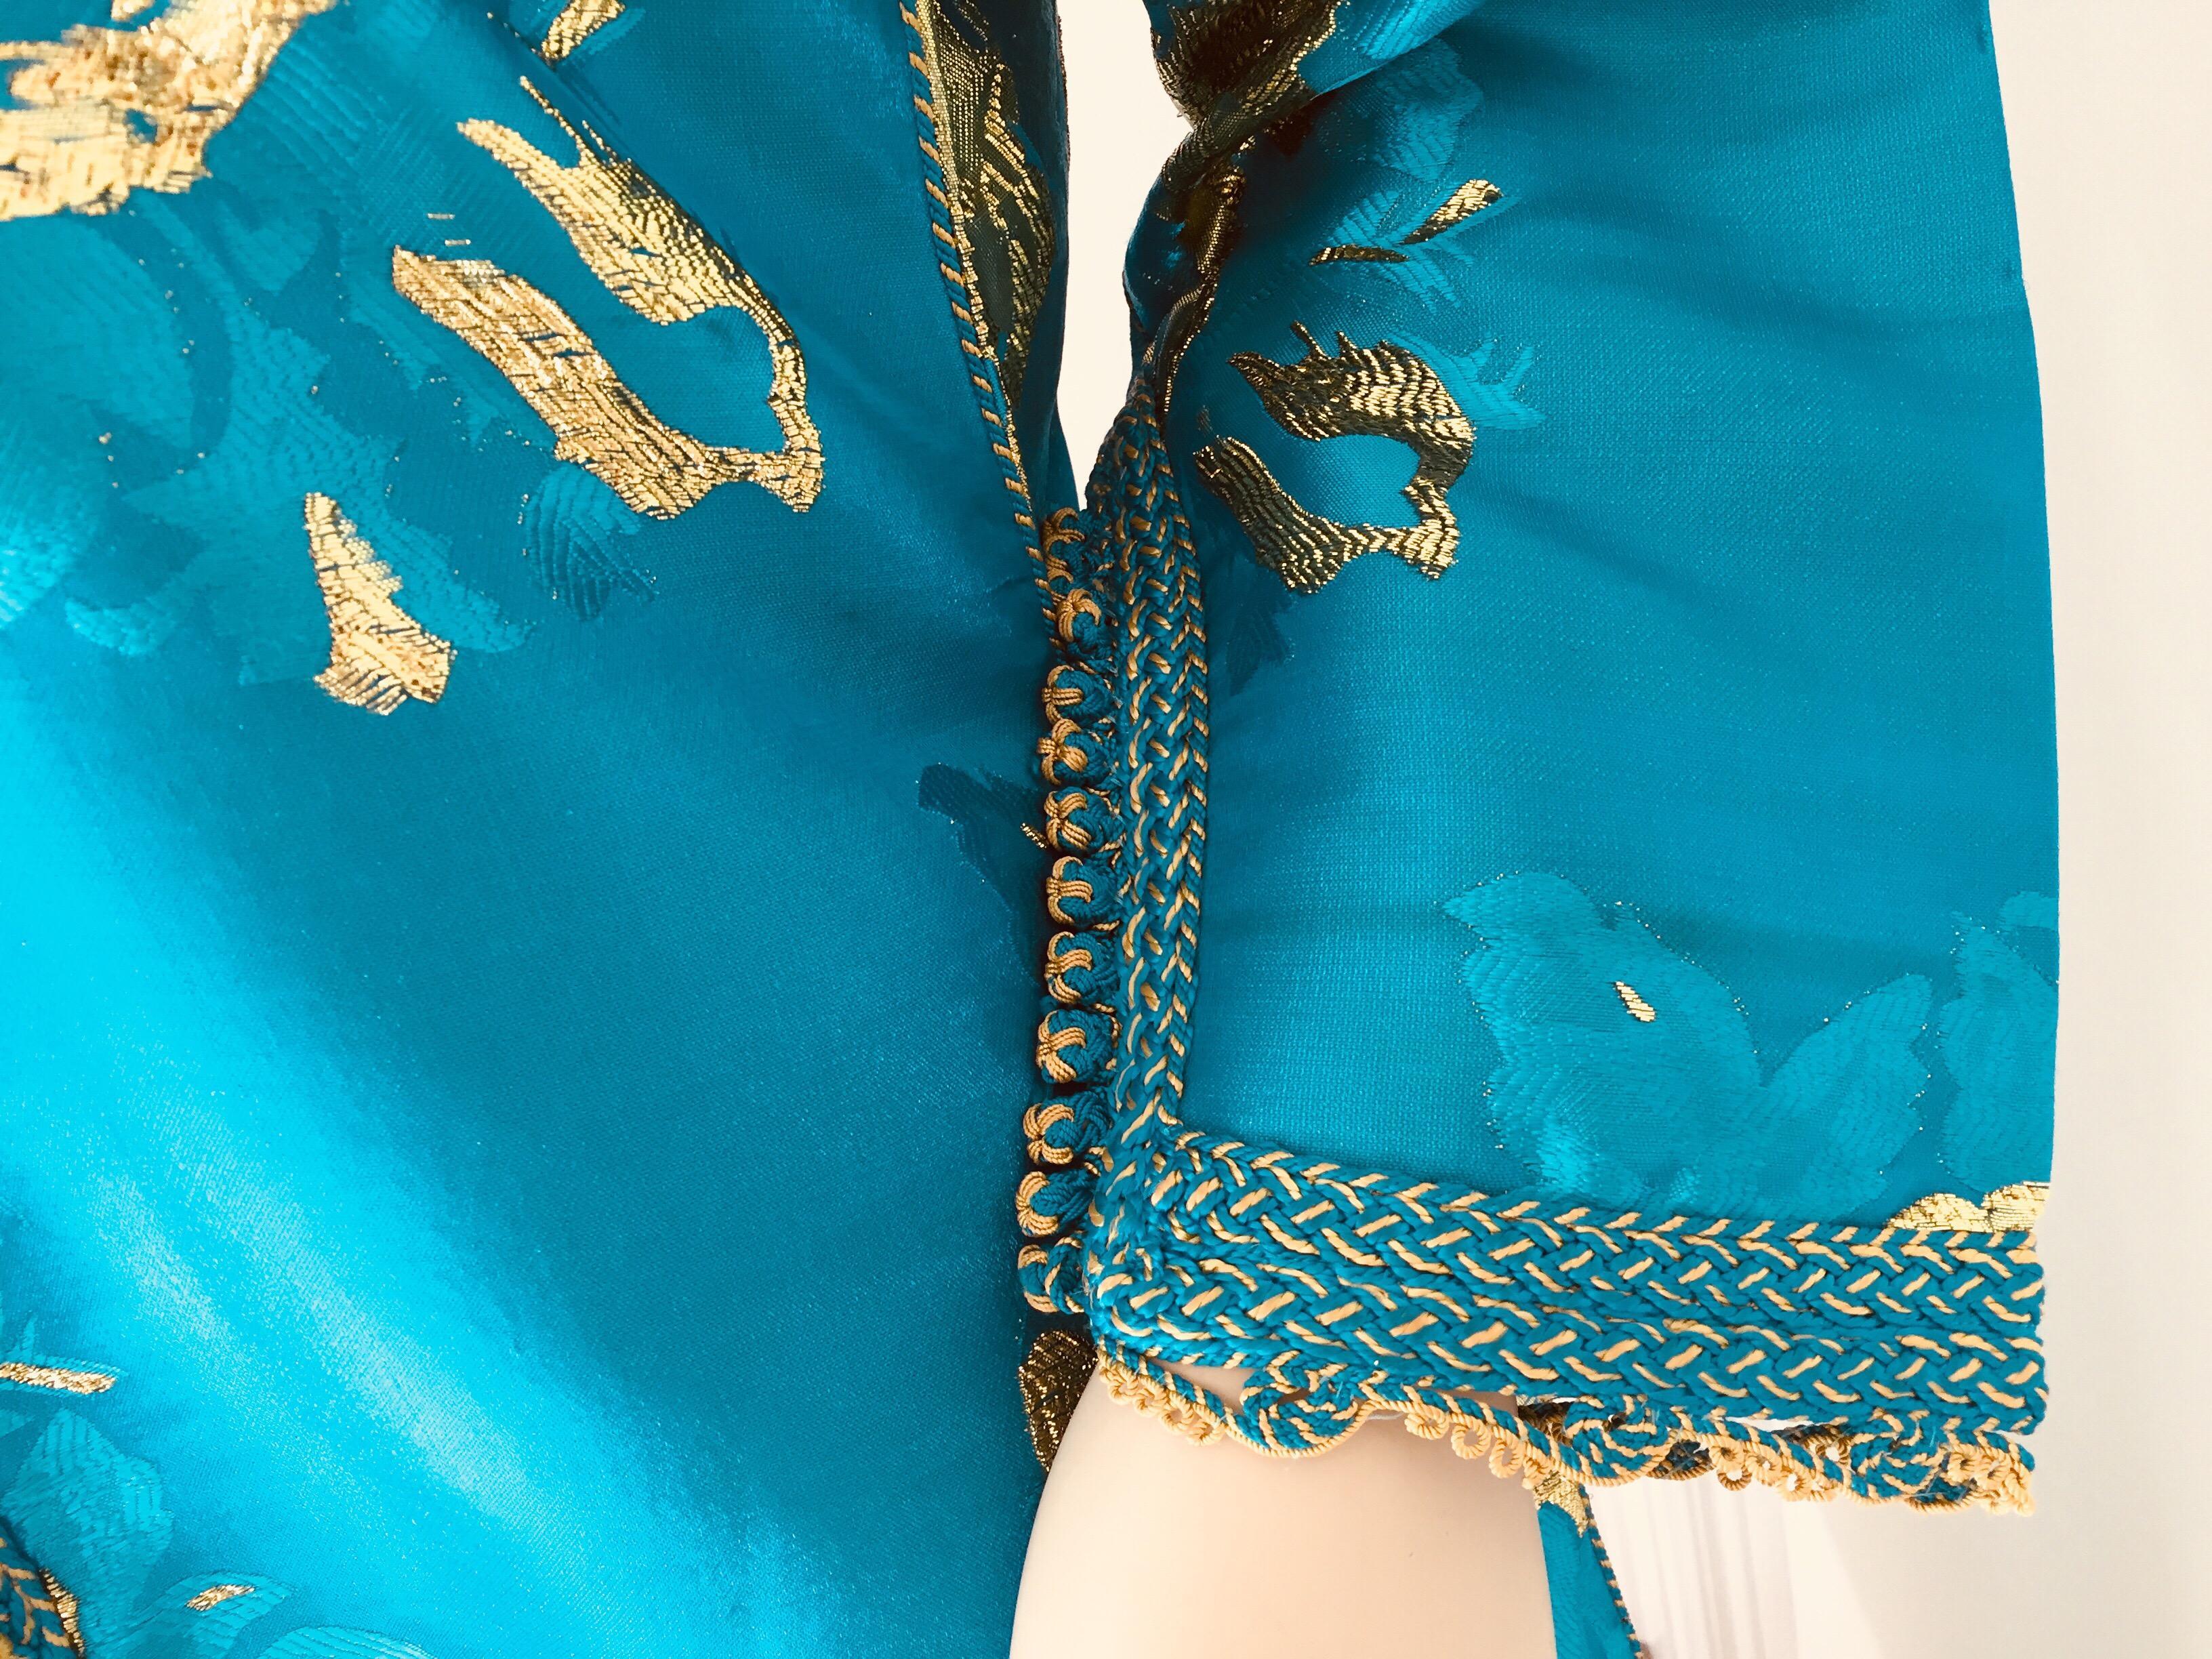 Women's Moroccan Kaftan in Turquoise and Gold Floral Brocade Metallic Lame